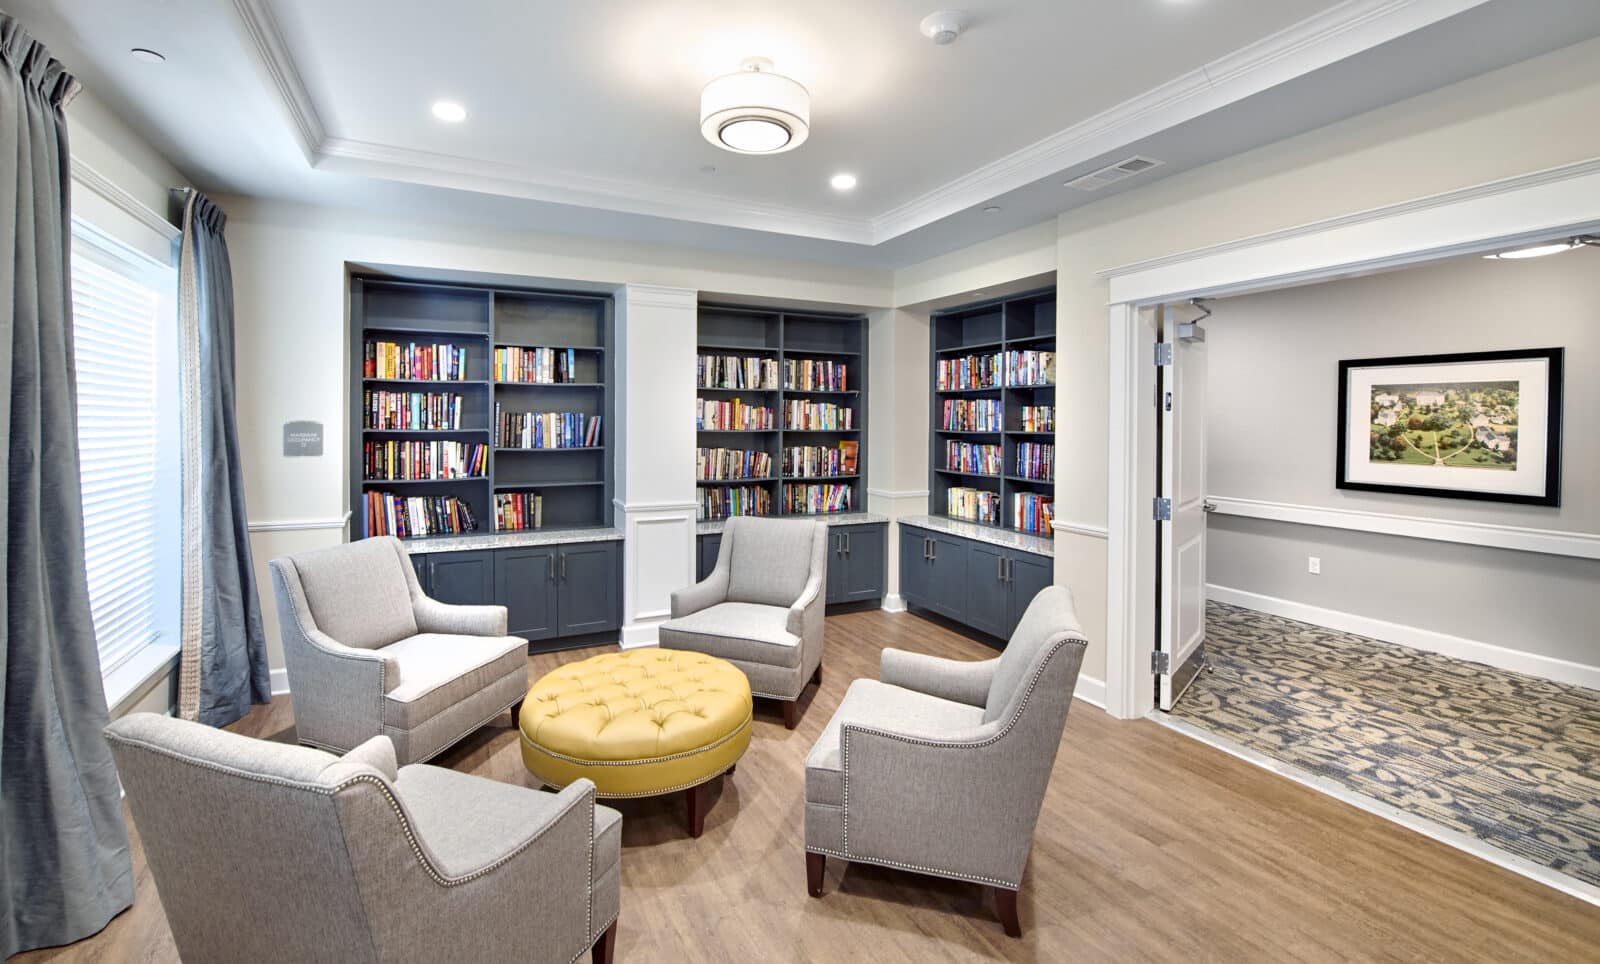 library with built in bookcase filled with books, four chairs and ottoman